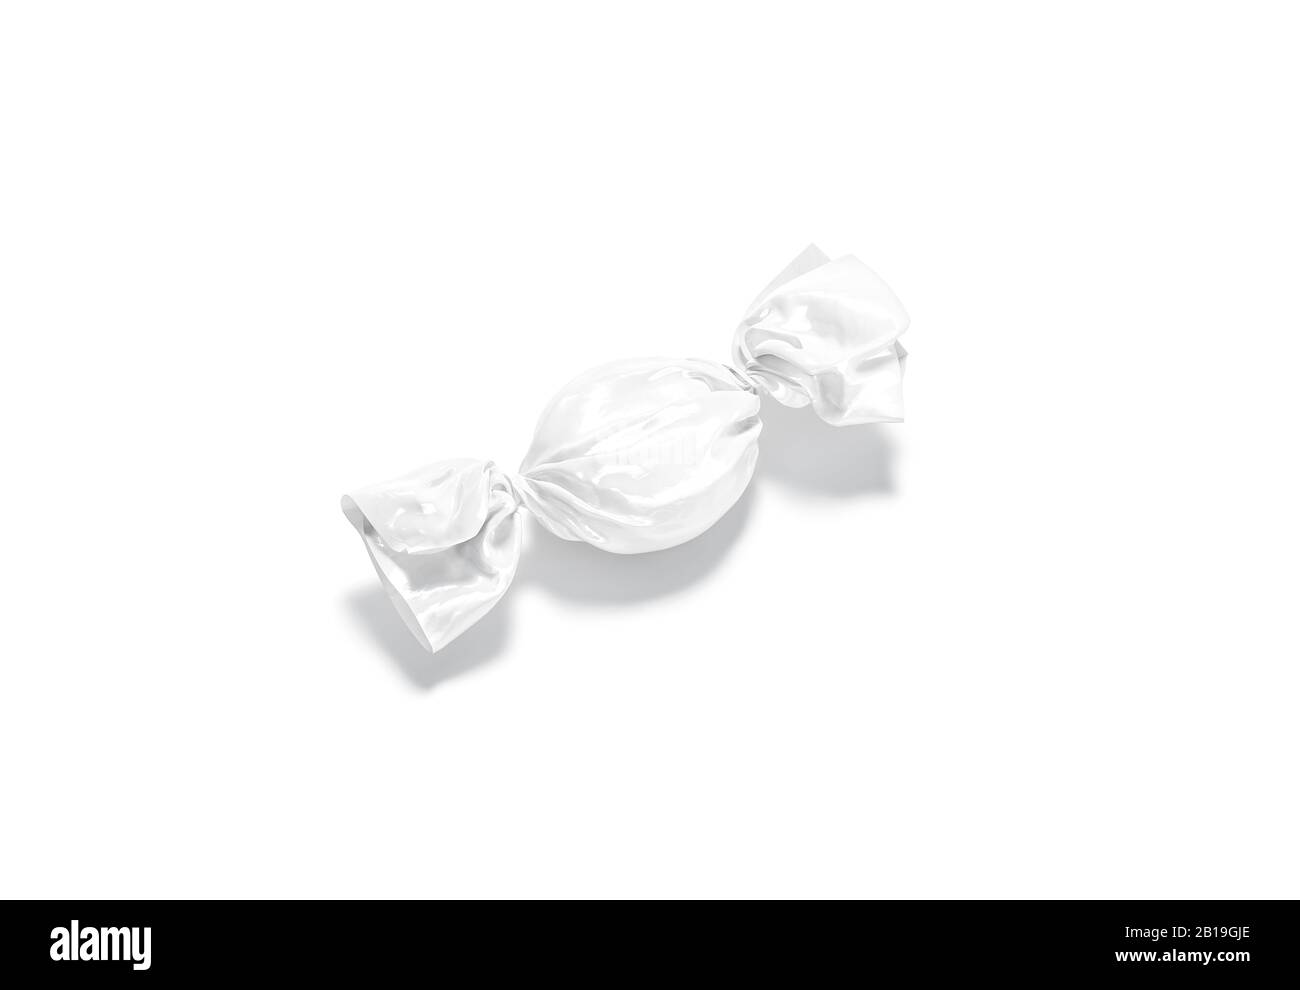 Blank white hadn candy foil wrapper mockup, side view Stock Photo